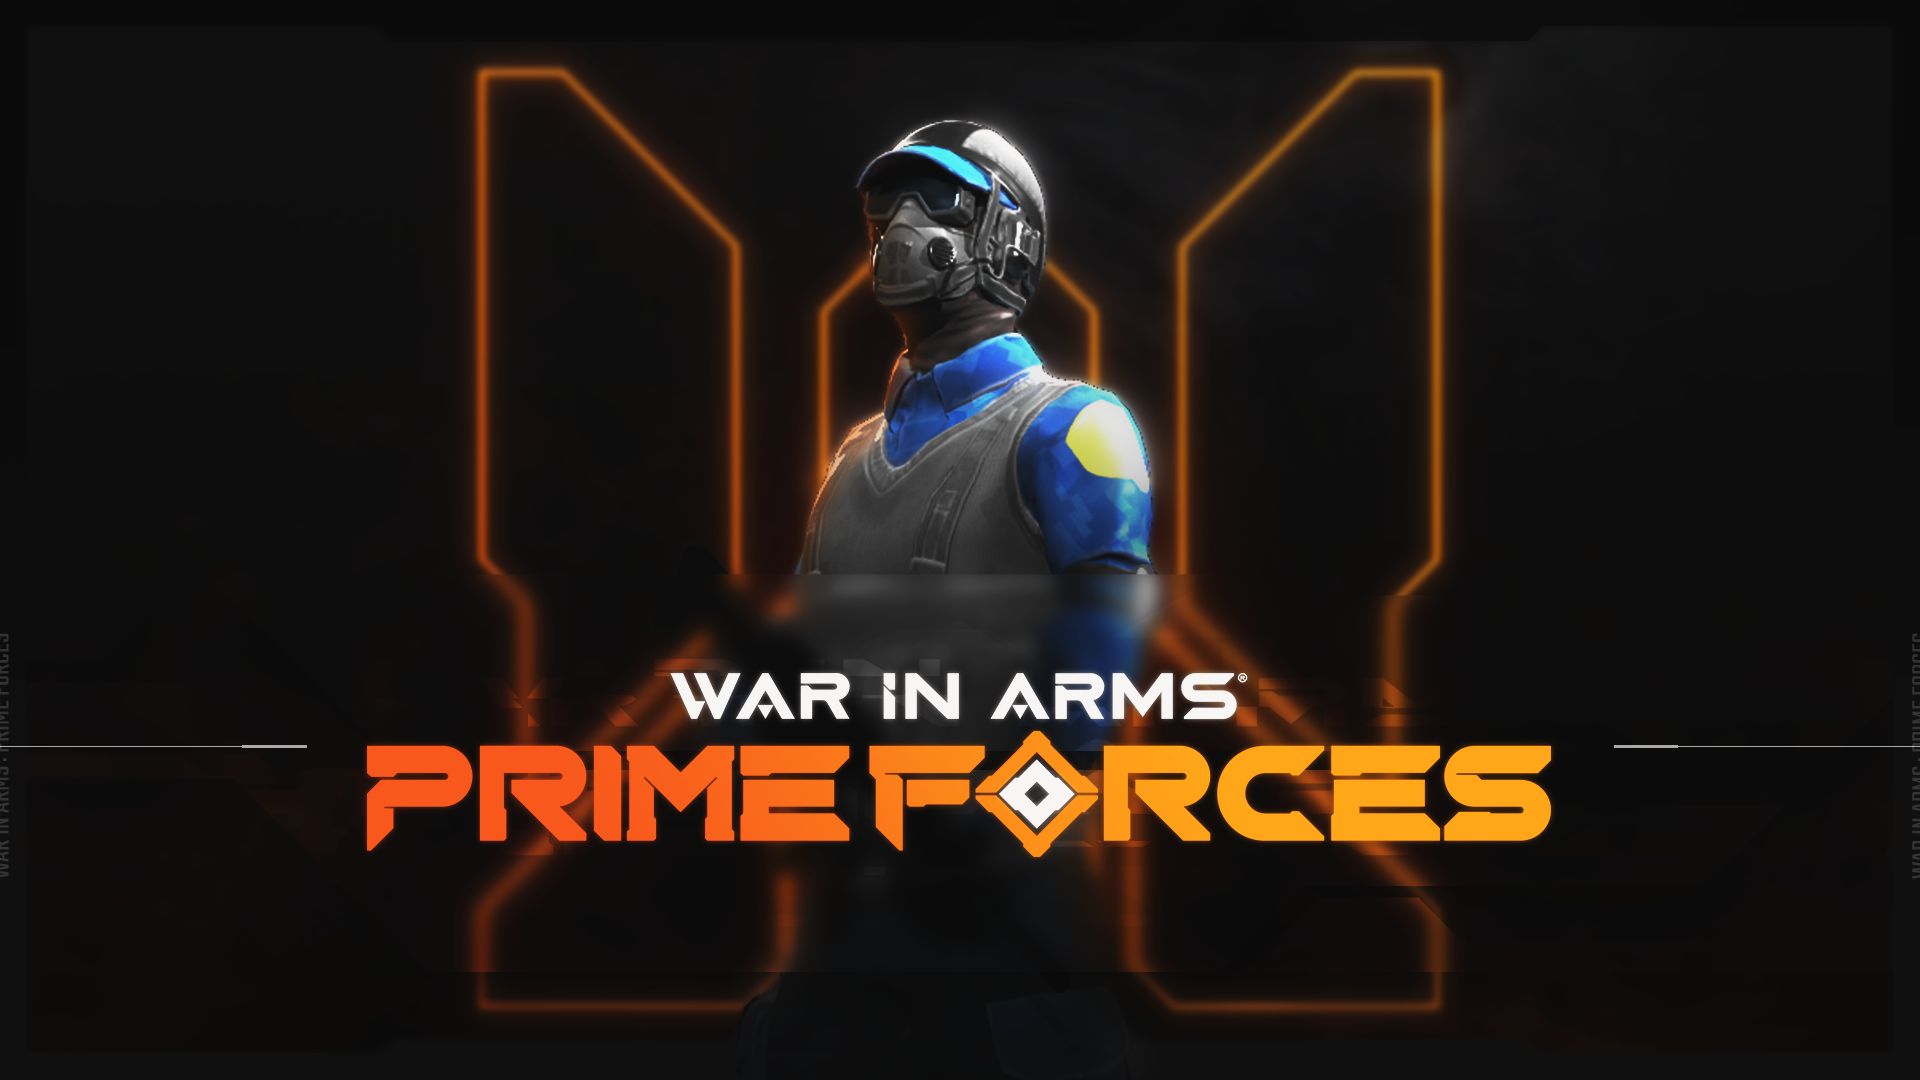 Download WAR IN ARMS: PRIME FORCES CQB Android free game.